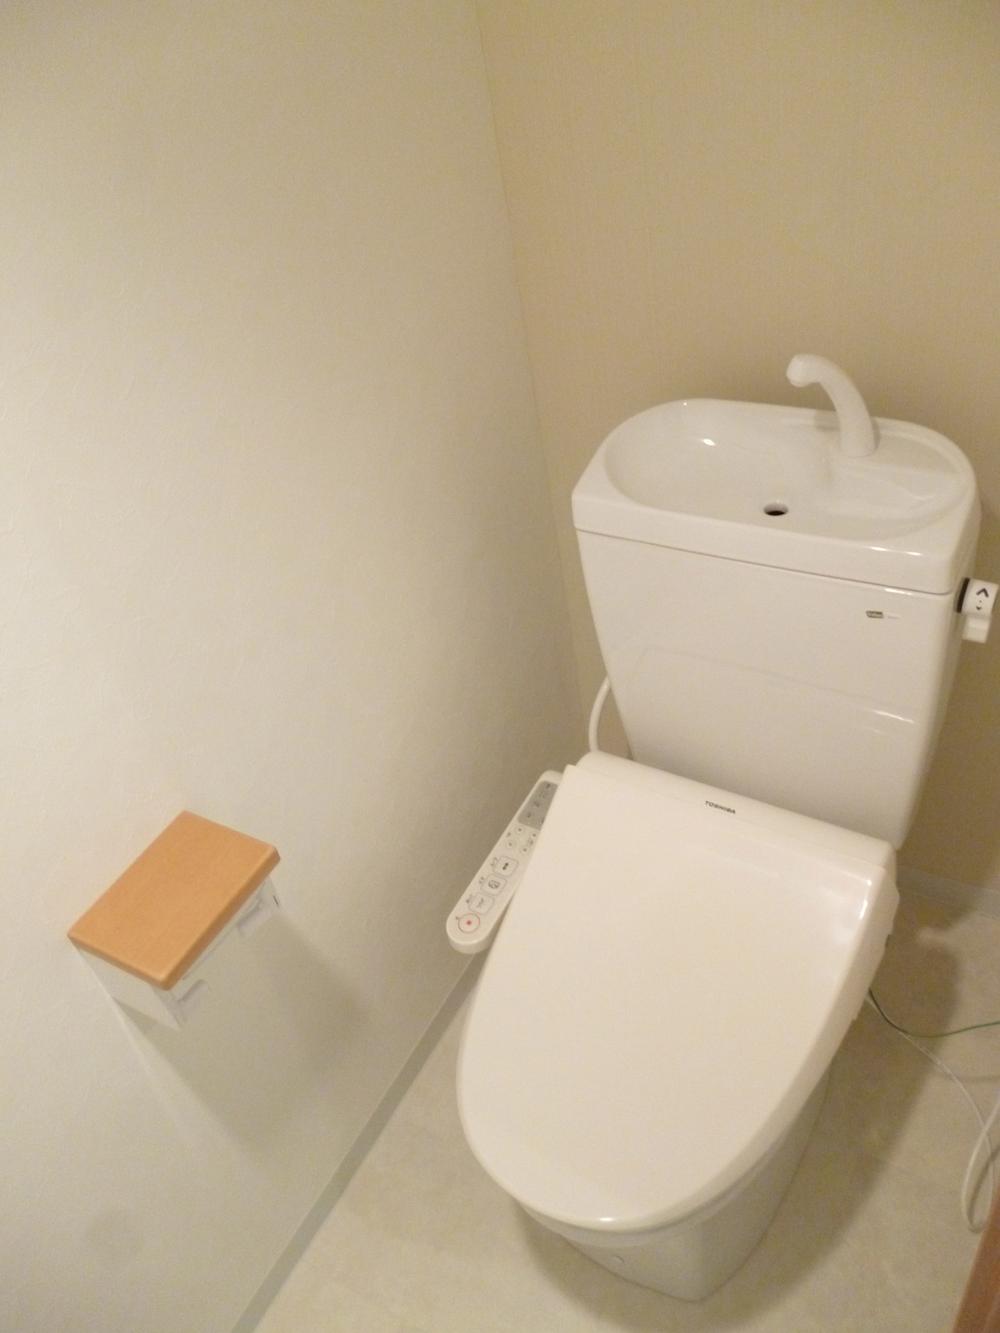 Toilet. It is the bidet toilet with a new